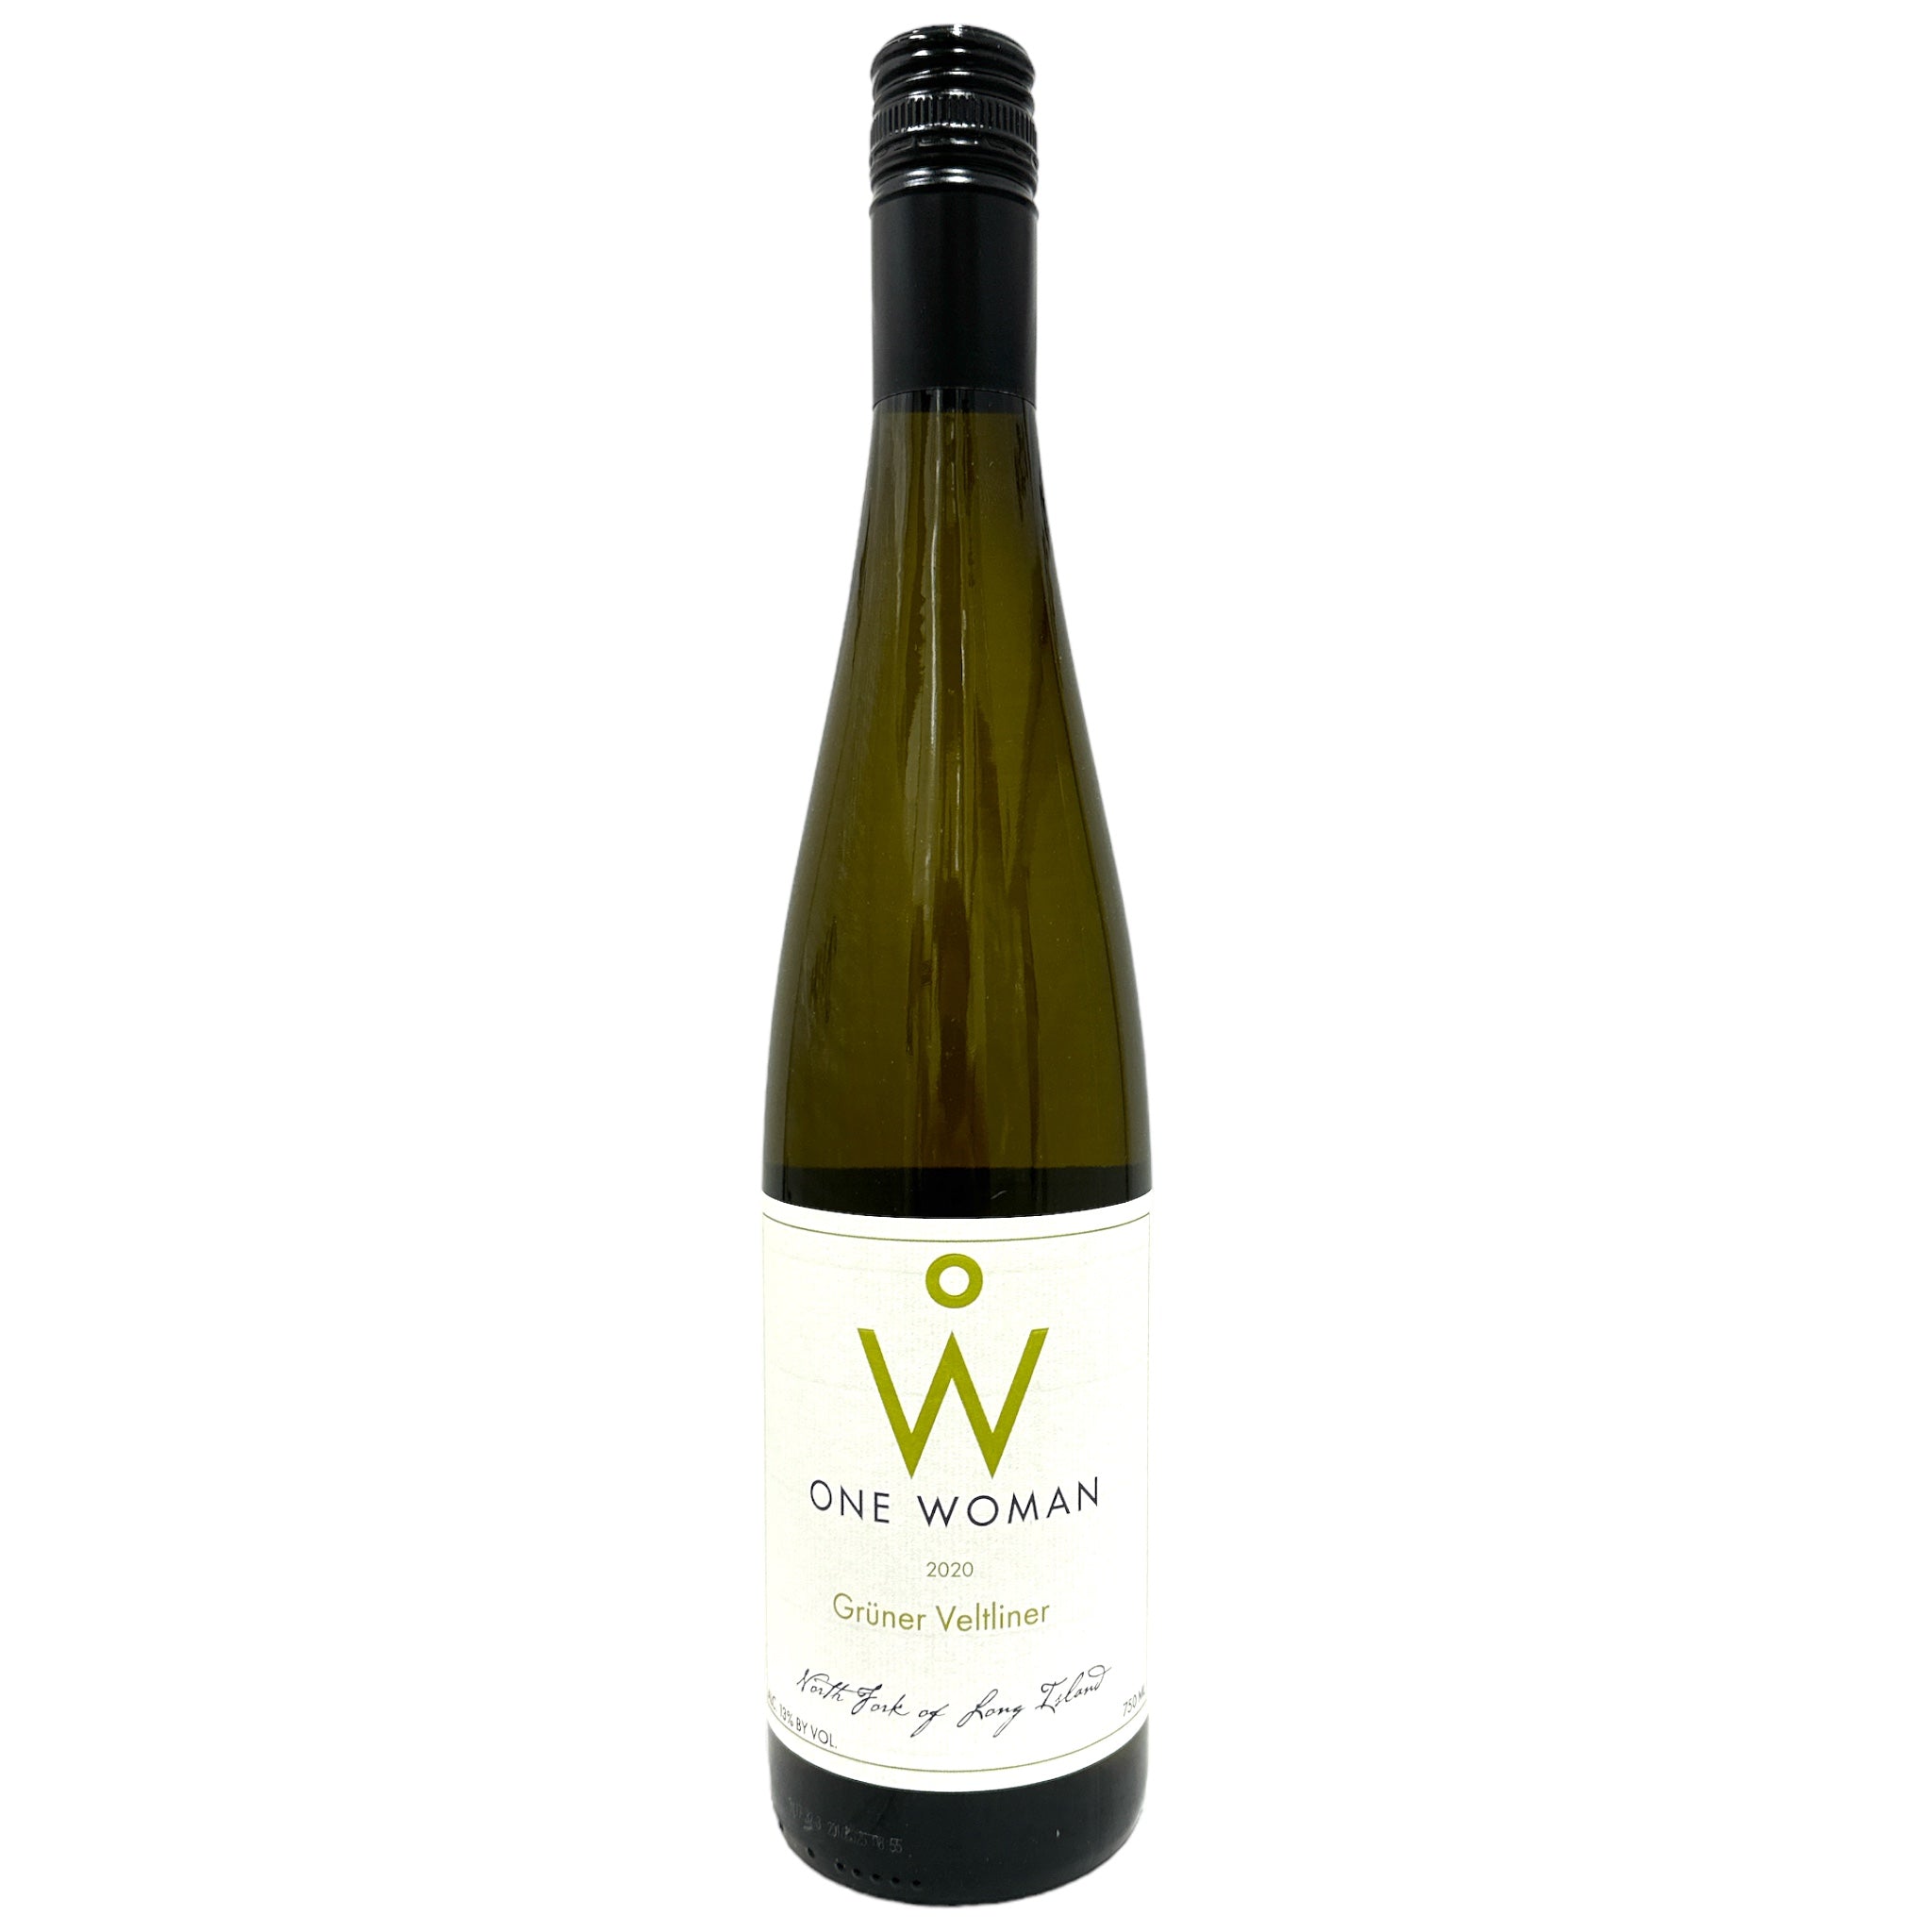 2020 One Woman Gruner Veltliner - One Woman Winery